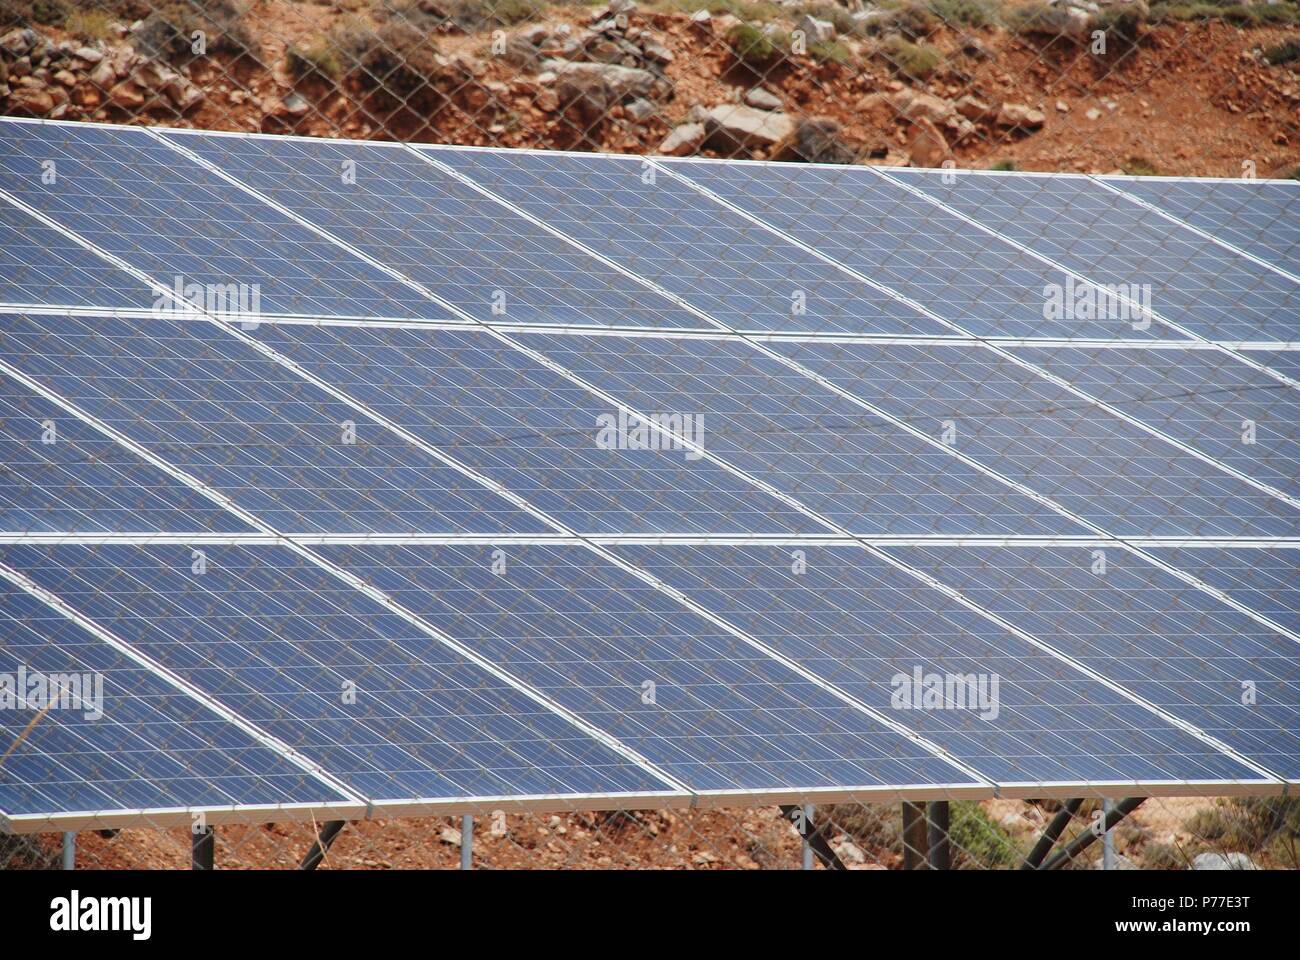 The solar power station on the Greek island of Tilos on June 20, 2018. The island aims to become self sufficient in power through renewable energy. Stock Photo